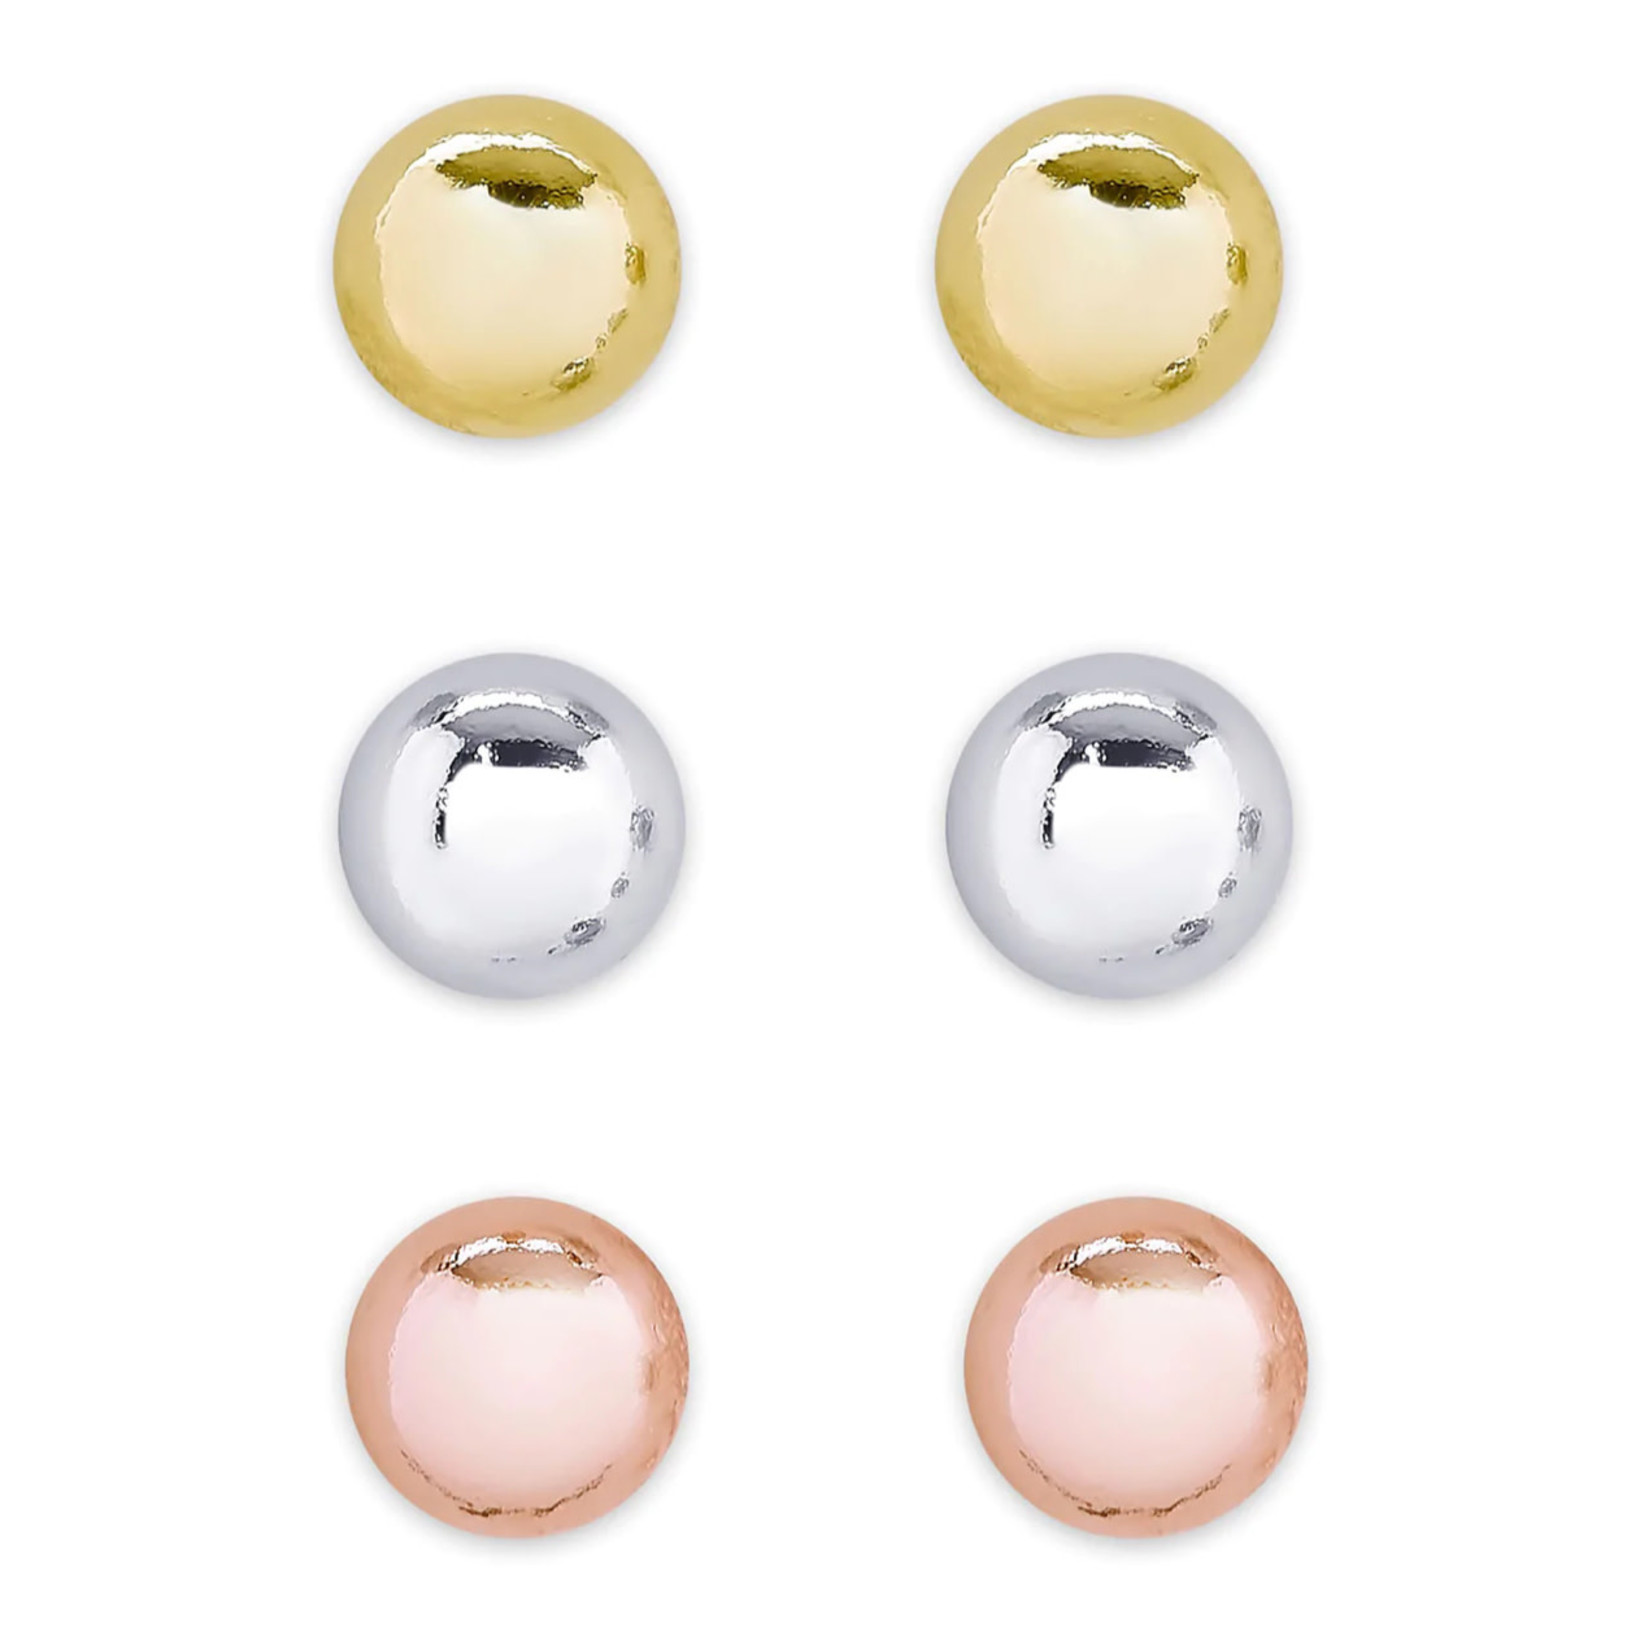 Lily Nily Ball Studs Set in Sterling Silver - Gold, Silver, Rose Gold